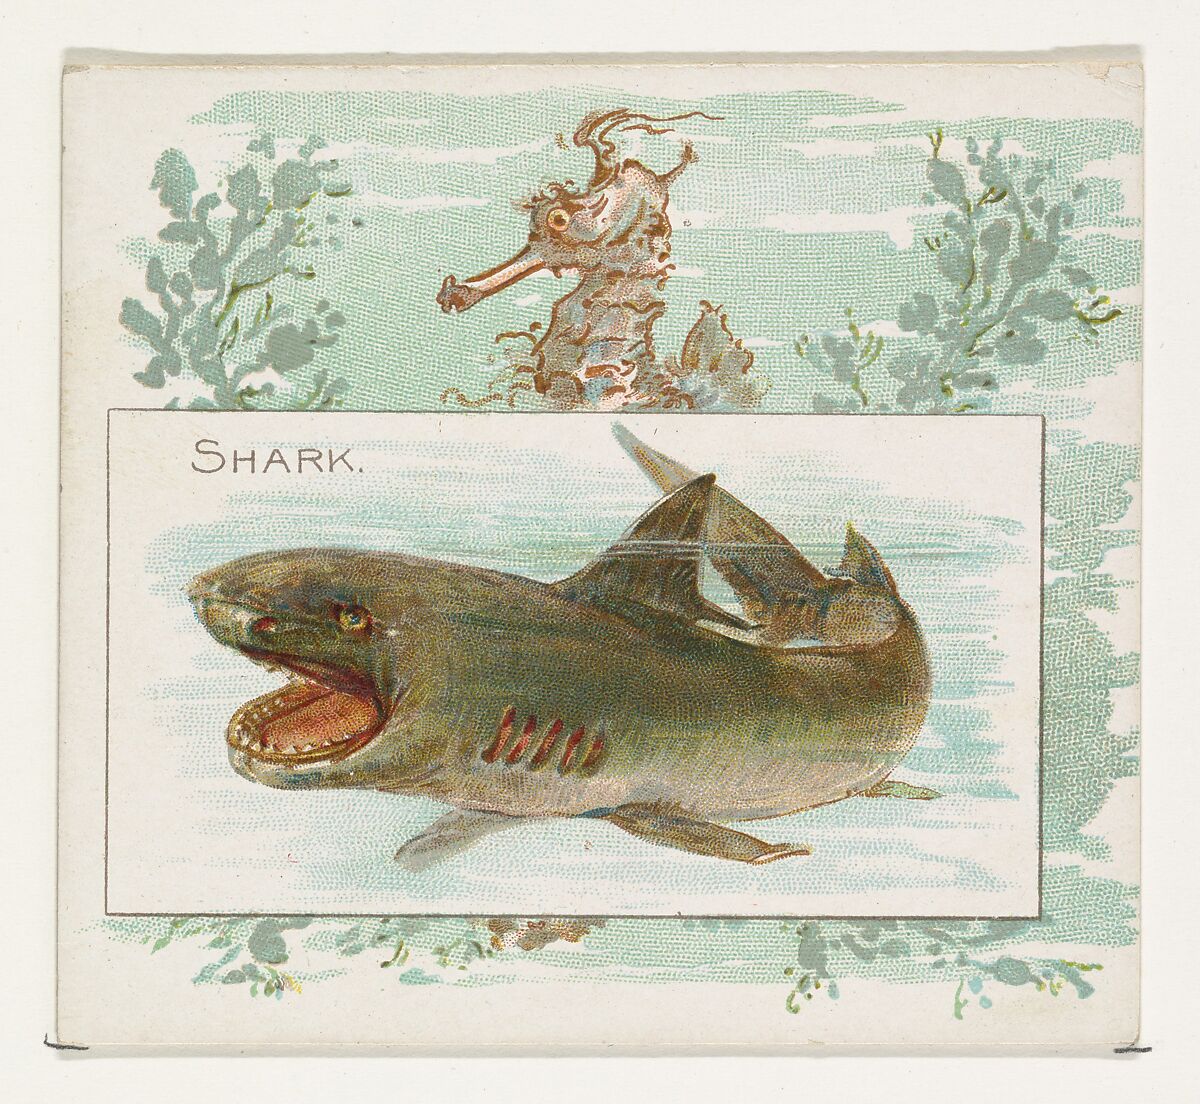 Shark, from Fish from American Waters series (N39) for Allen & Ginter Cigarettes, Issued by Allen &amp; Ginter (American, Richmond, Virginia), Commercial color lithograph 